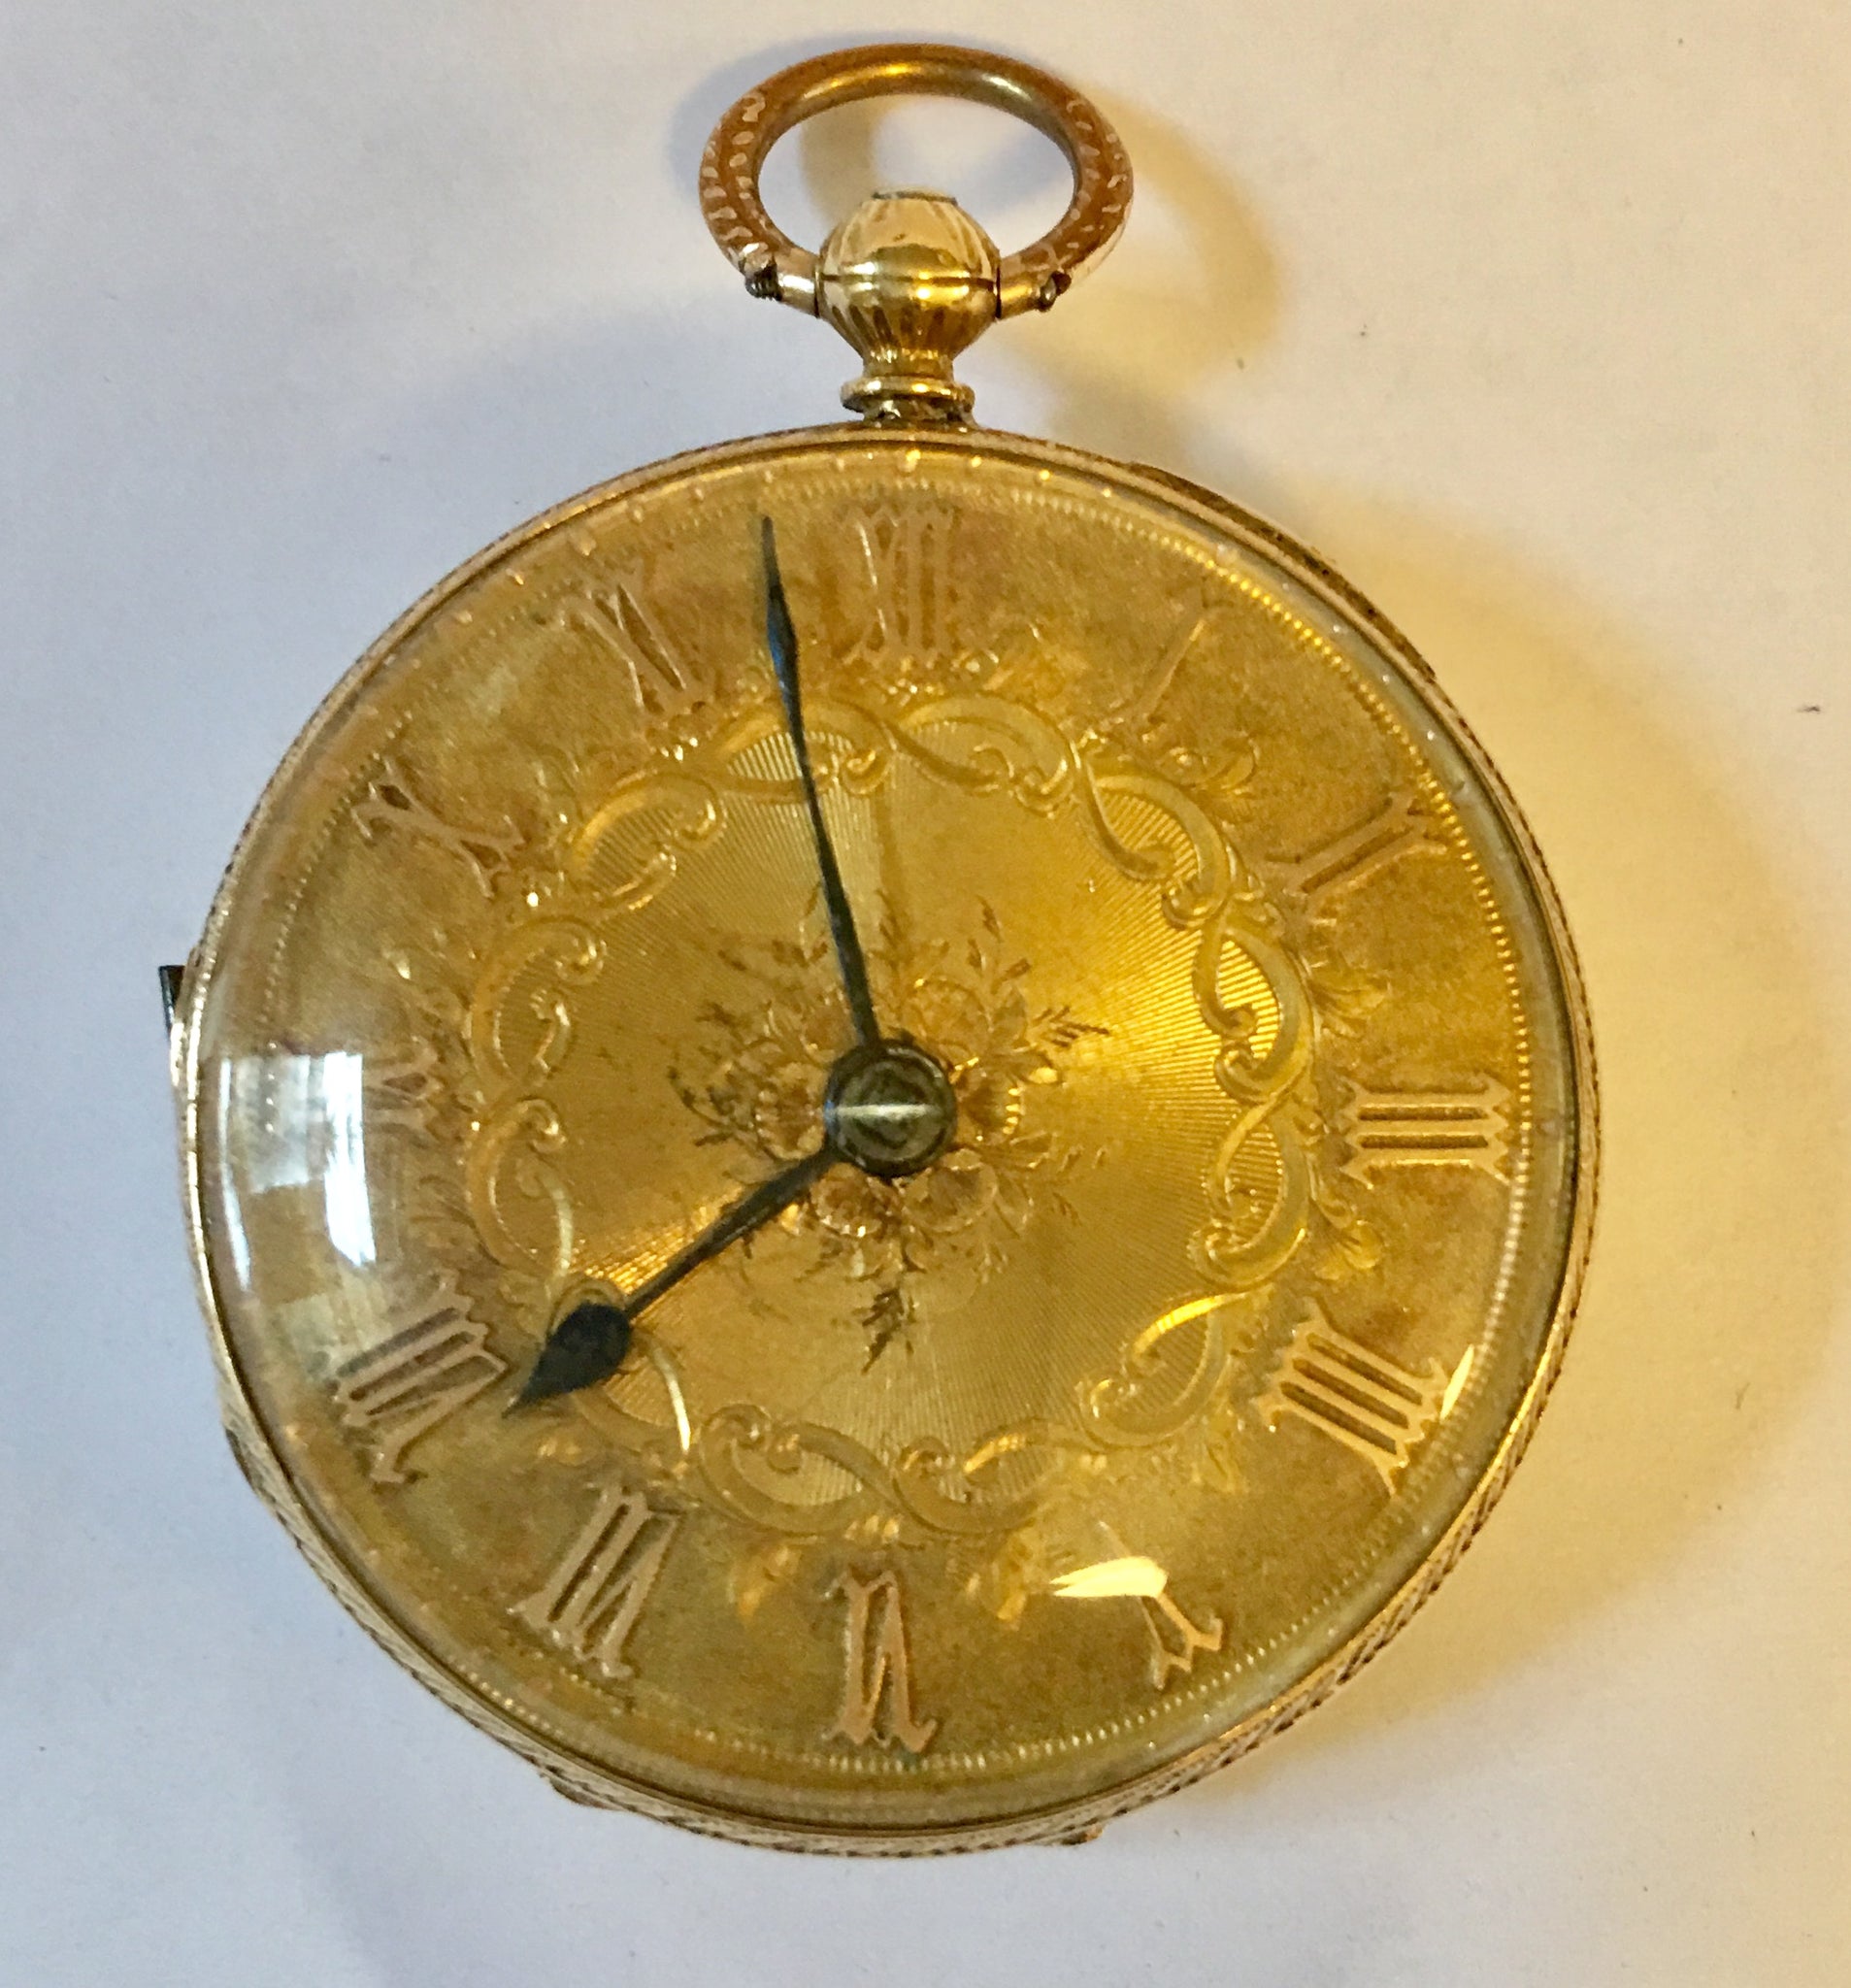 ornate antique pocket watches